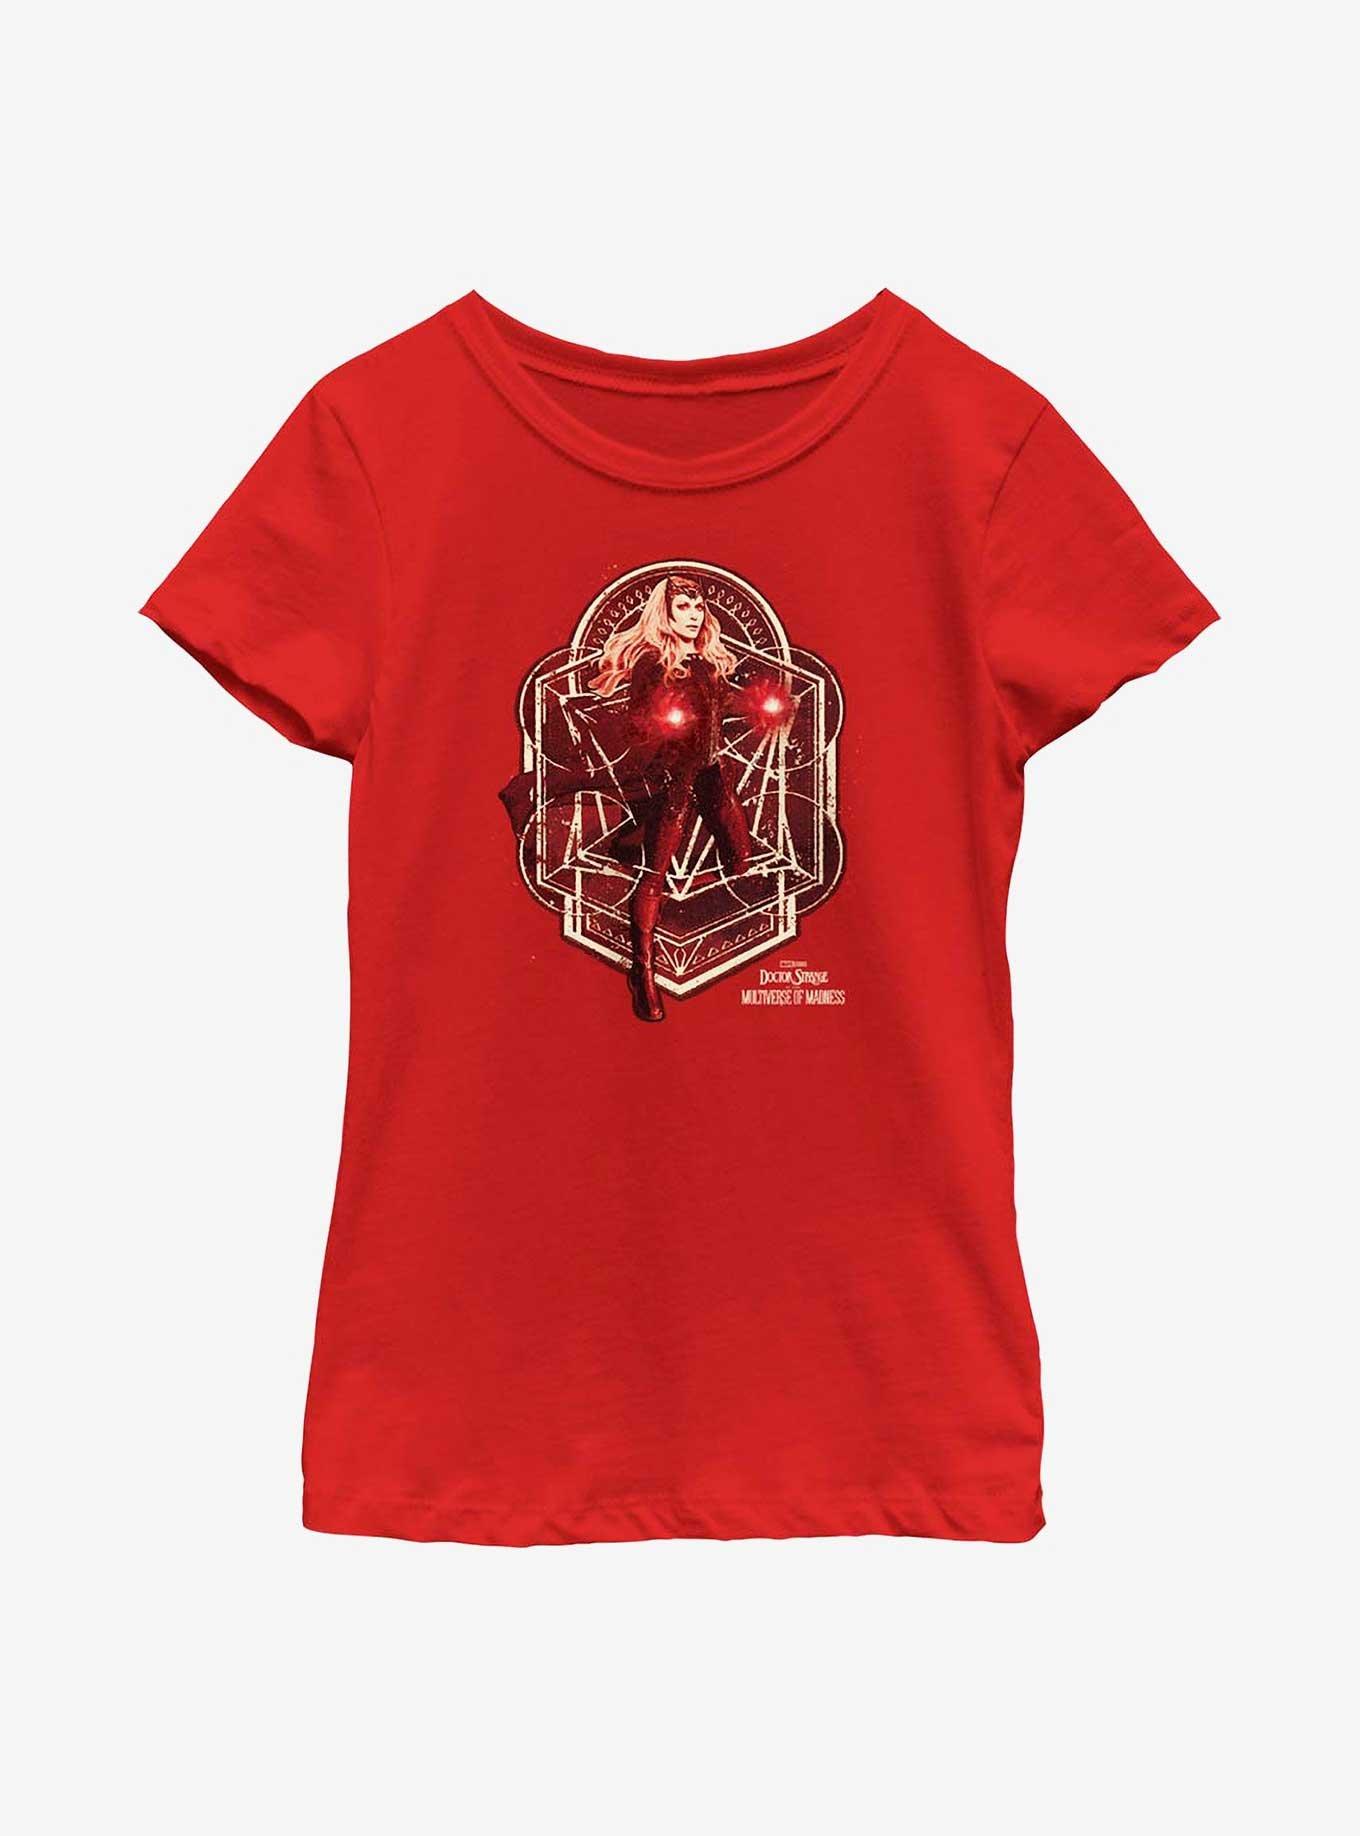 Marvel Doctor Strange Multiverse Of Madness Scarlet Witch Magic Youth Girls T-Shirt, RED, hi-res